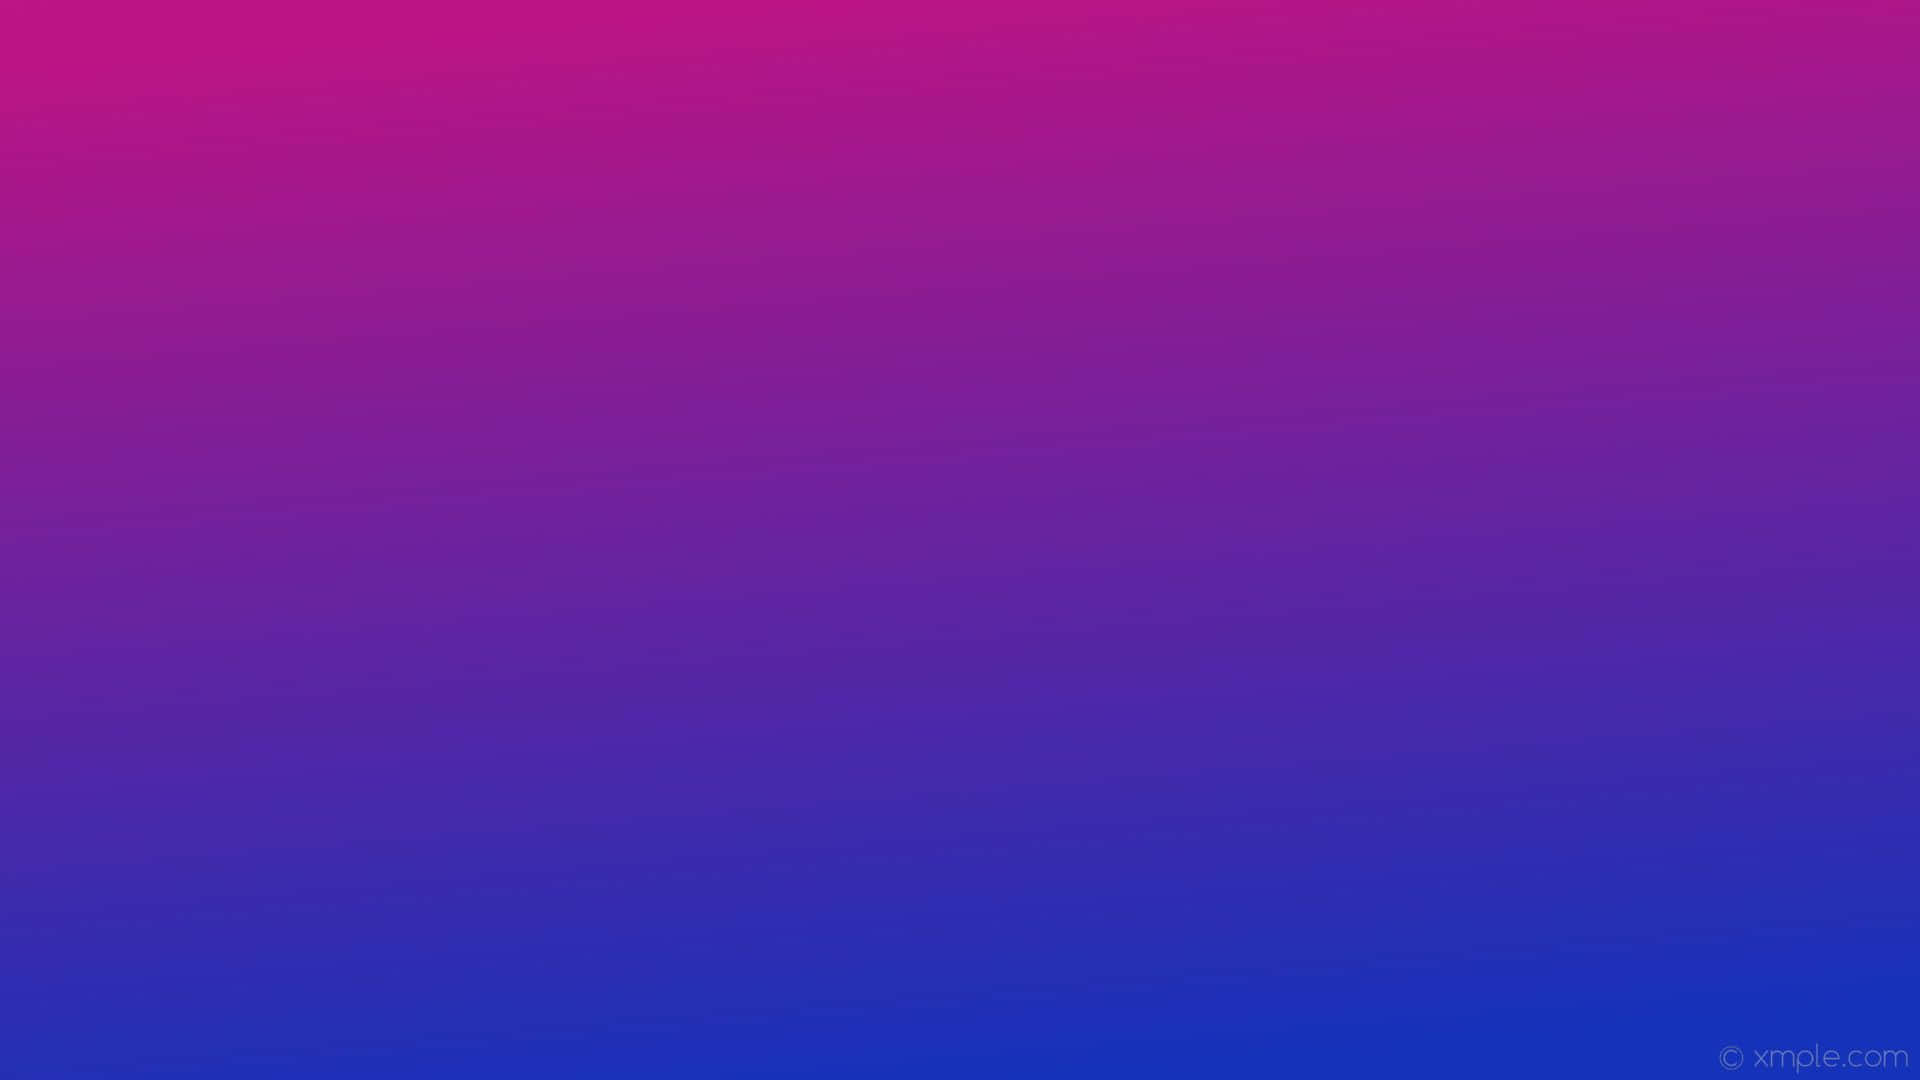 Blue Ombre Background Purple To Dark Blue Surface